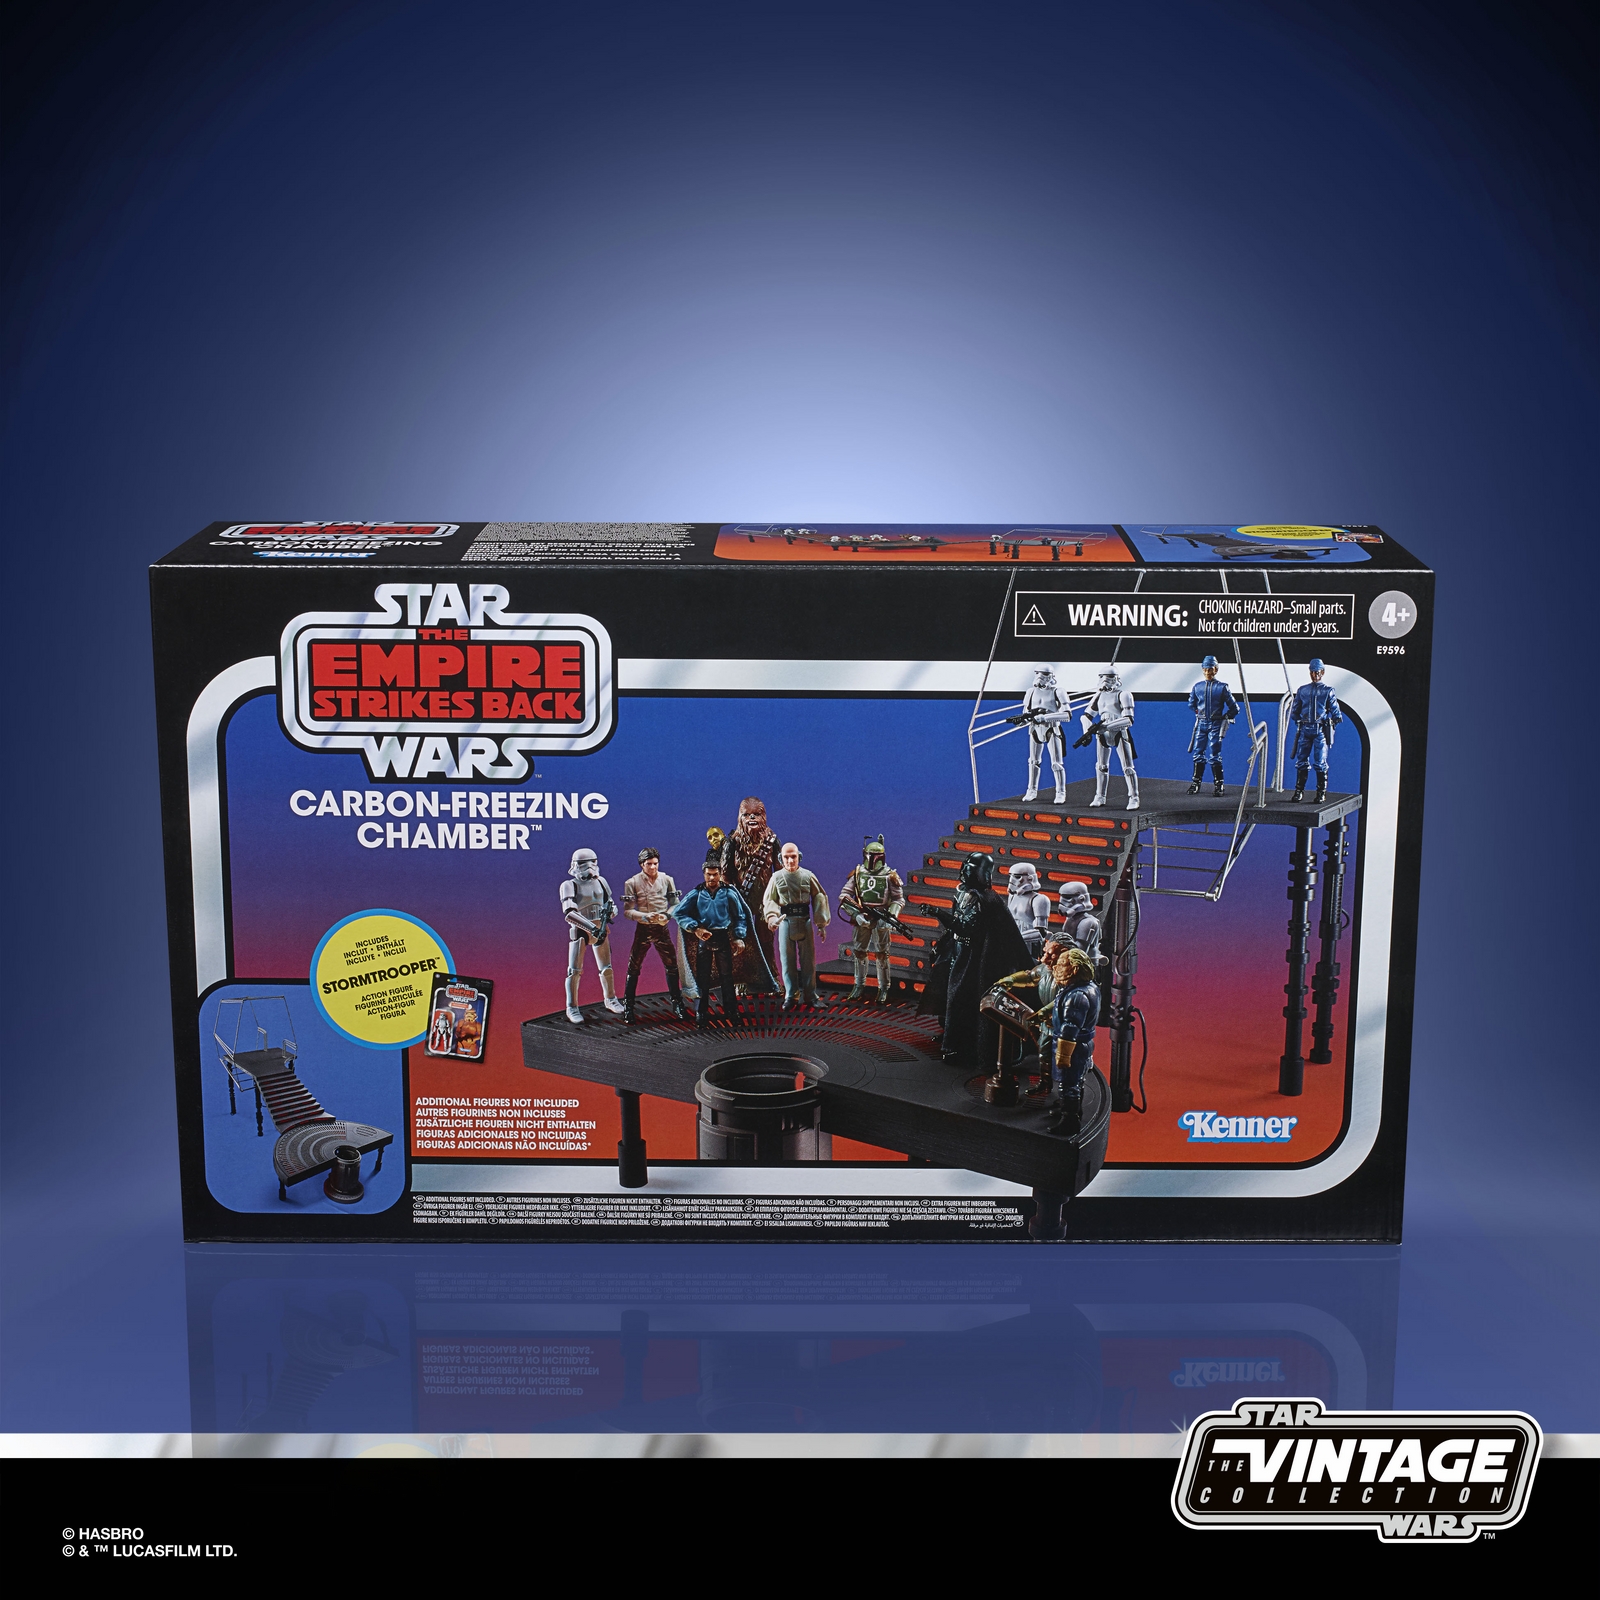 STAR WARS THE VINTAGE COLLECTION CARBON-FREEZING CHAMBER Playset - in pck (1).jpg